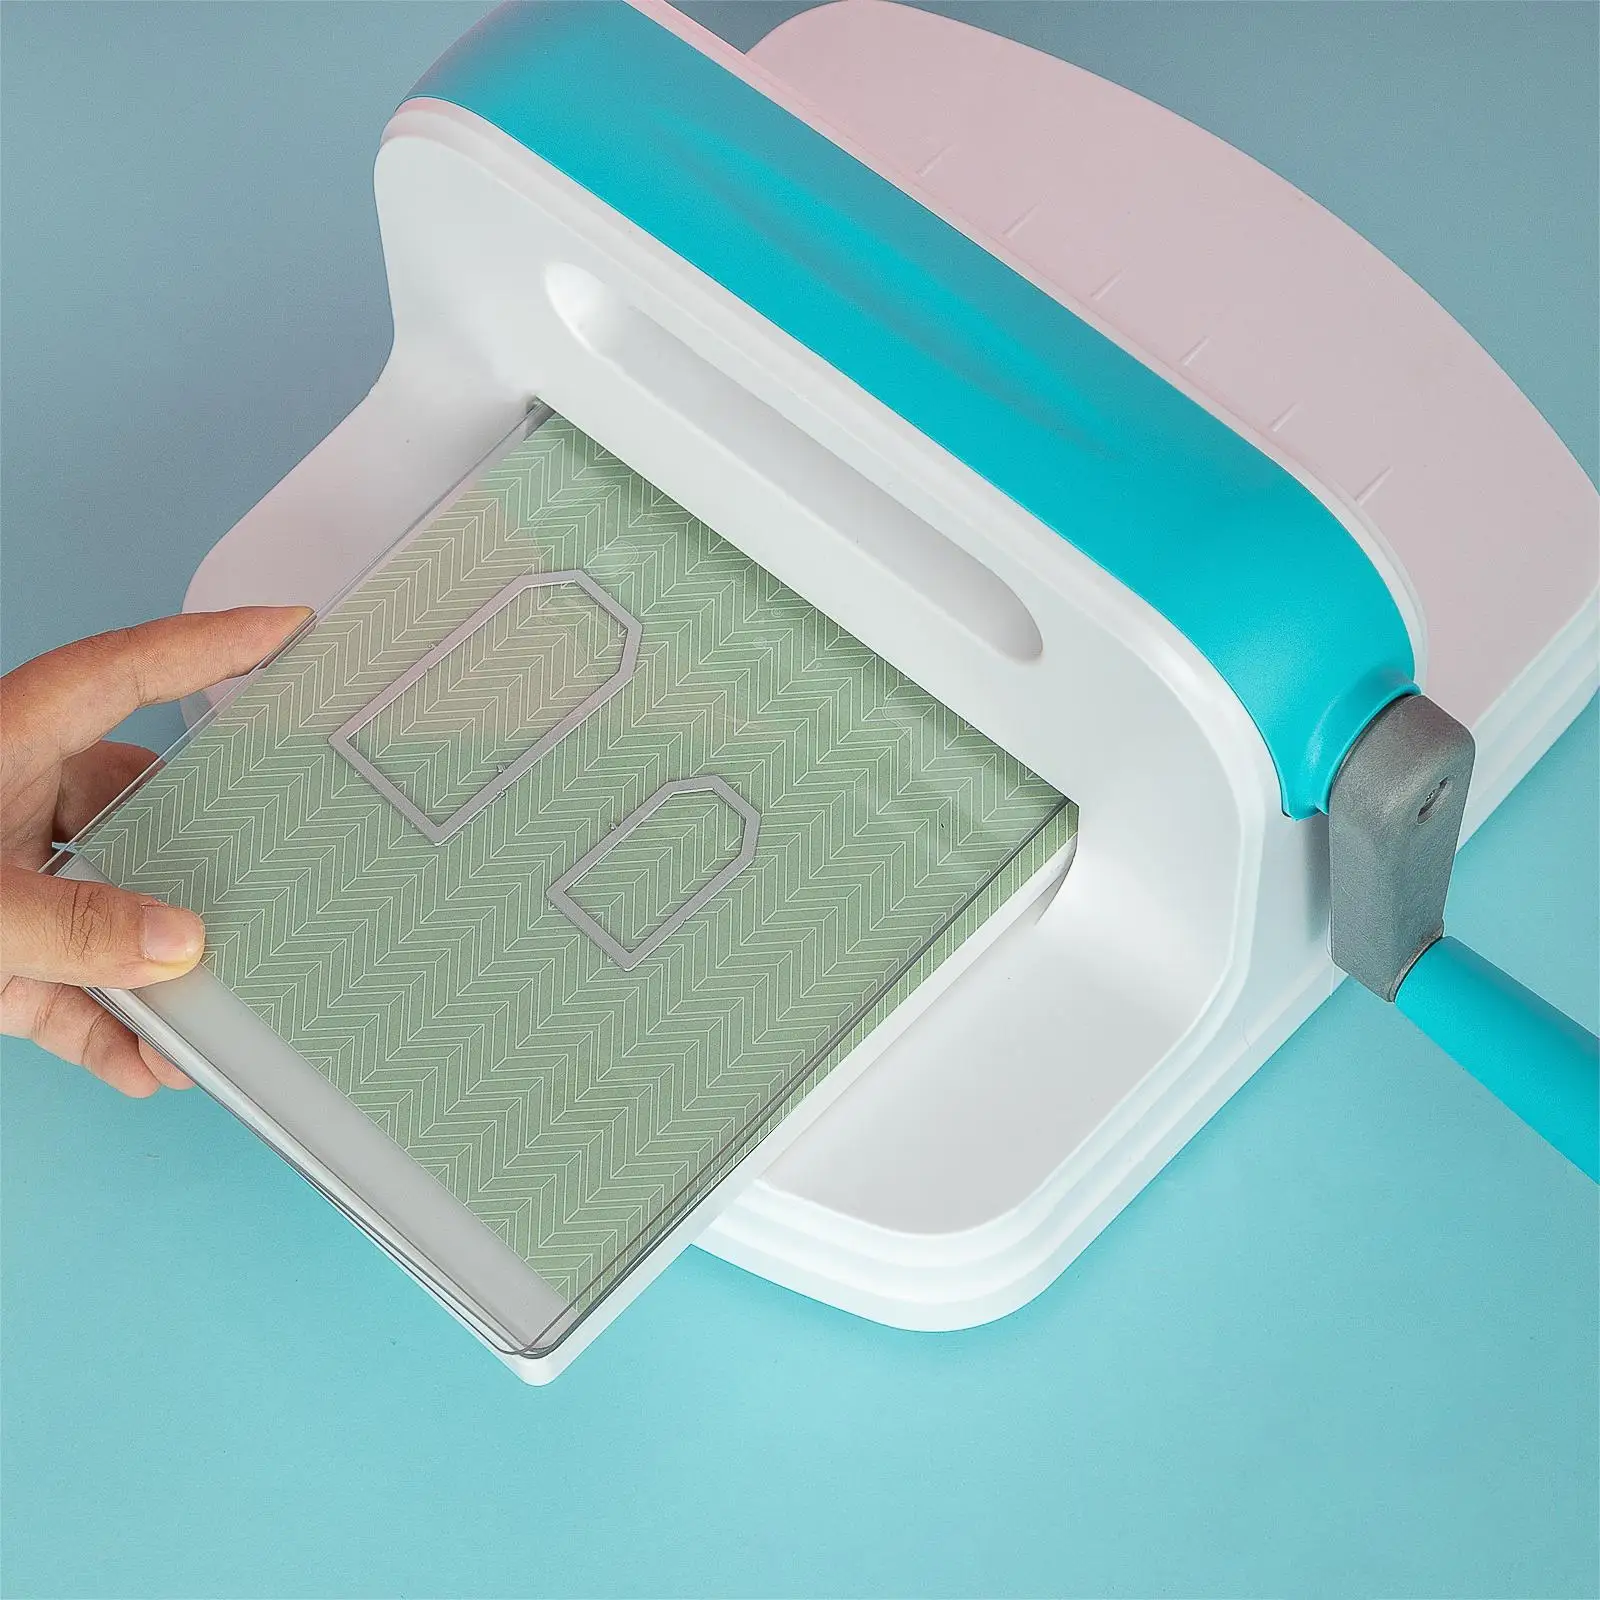 Die Cutting and Embossing Machine Embosser Paper Cutter for Card Making Embossing Manual Decorative Scrapbooking Cardmaking